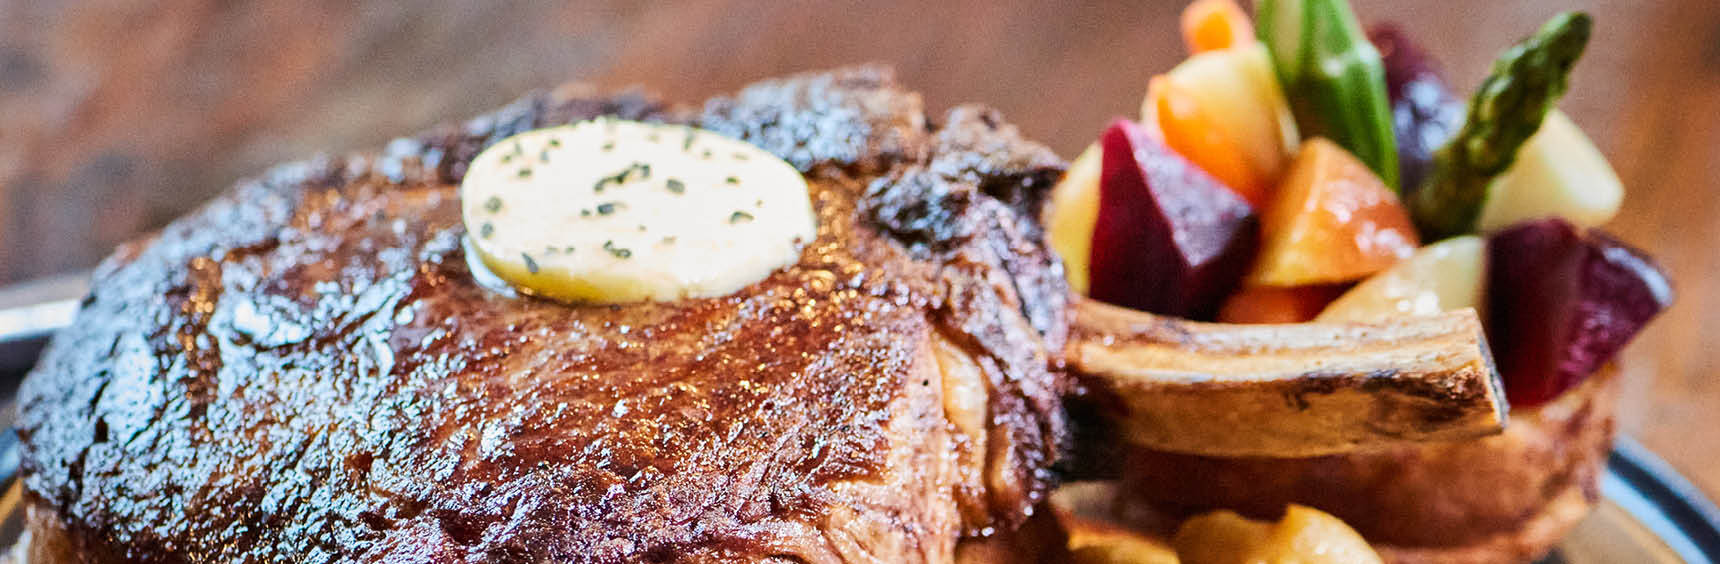 Close-up of a plated steak with a side of potatoes